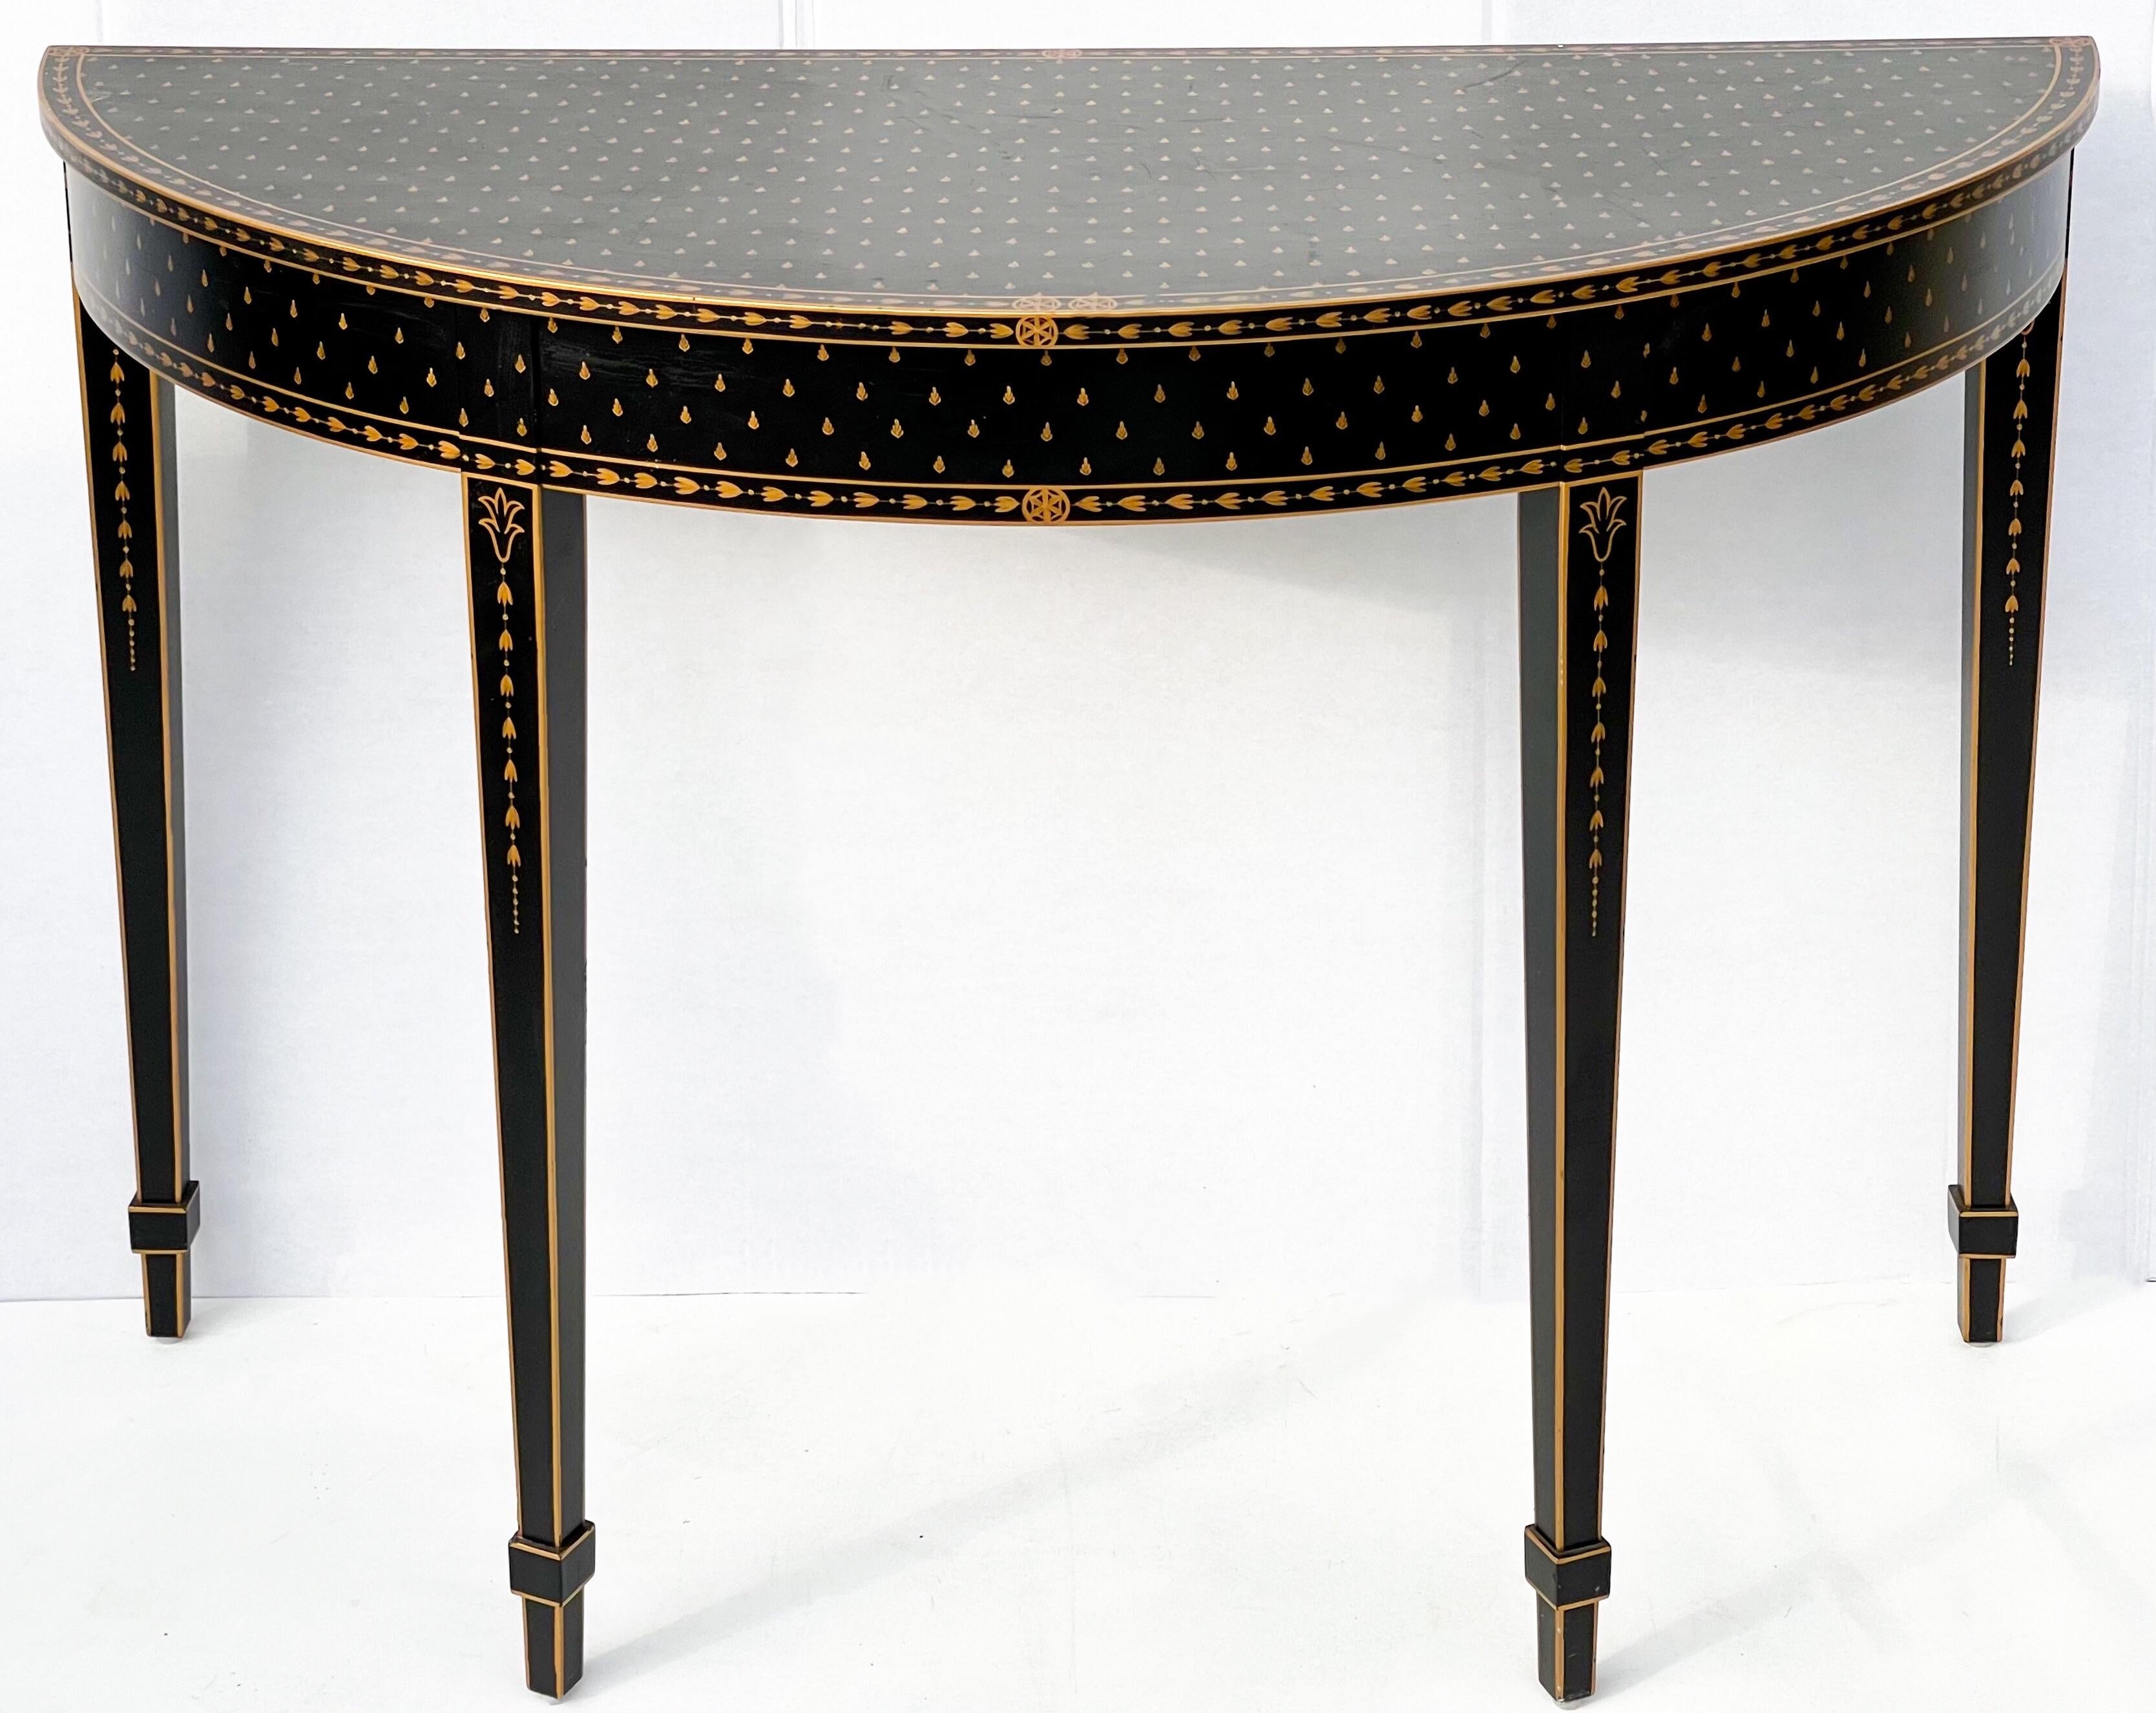 American Regency Style Ebonized and Gilt Painted Console Table by Chelsea House